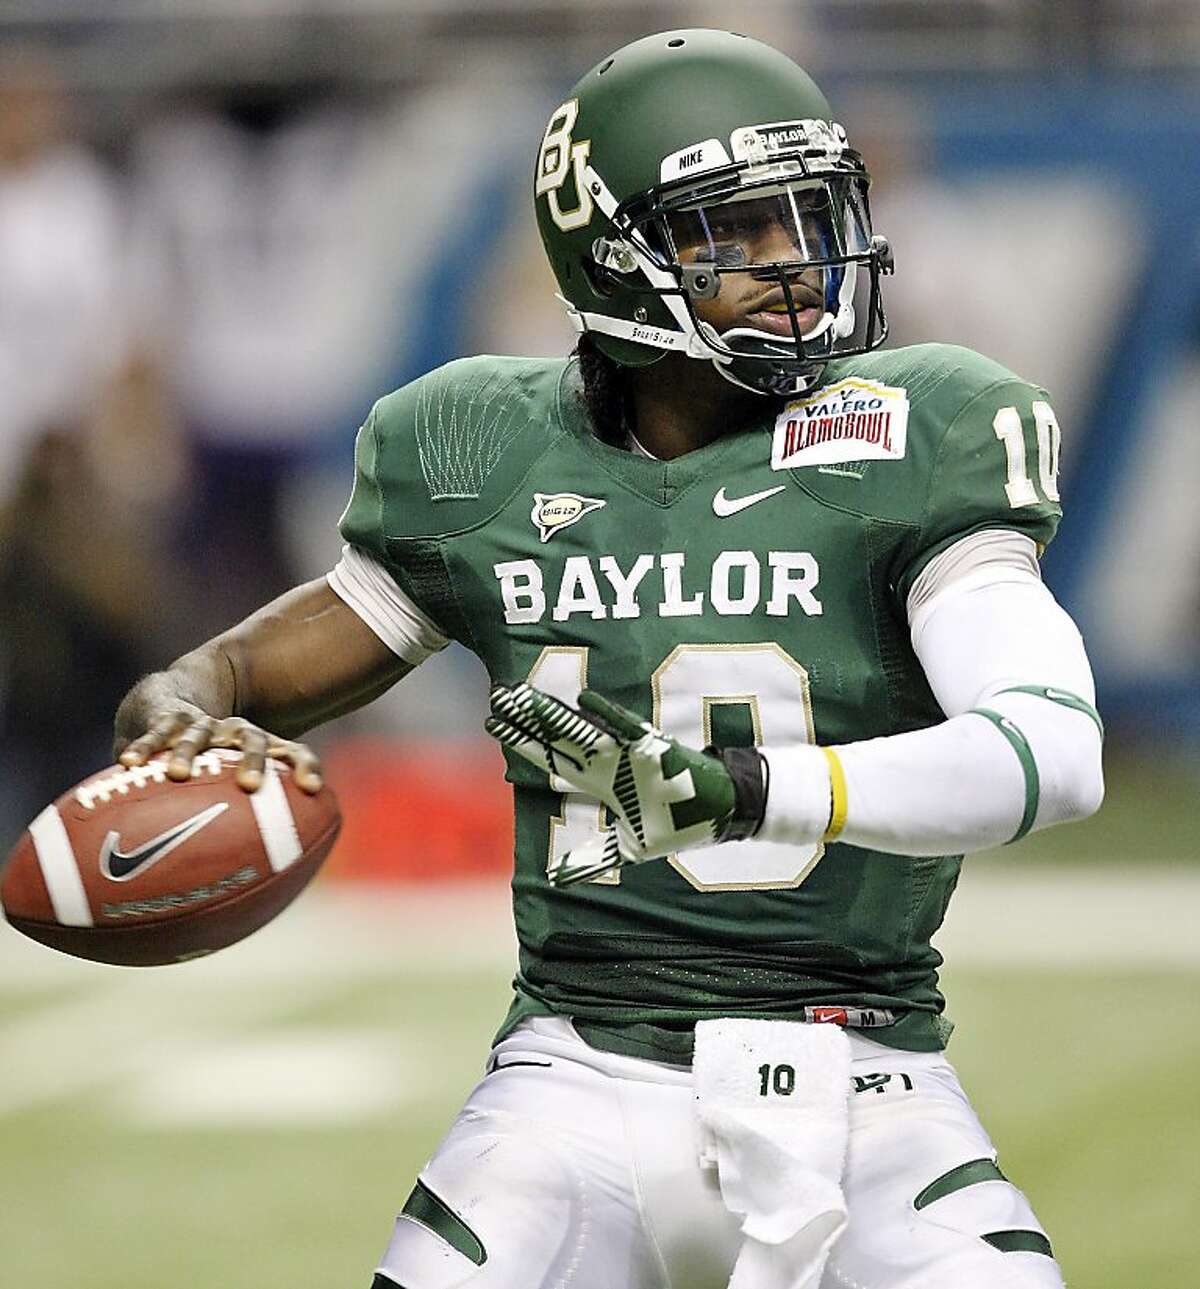 FOR SPORTS - Baylor's Robert Griffin III looks to pass against Washington during first half action of the 2011 Valero Alamo Bowl Thursday Dec. 29, 2011 at the Alamodome in San Antonio,Tx. (PHOTO BY EDWARD A. ORNELAS/eaornelas@express-news.net)